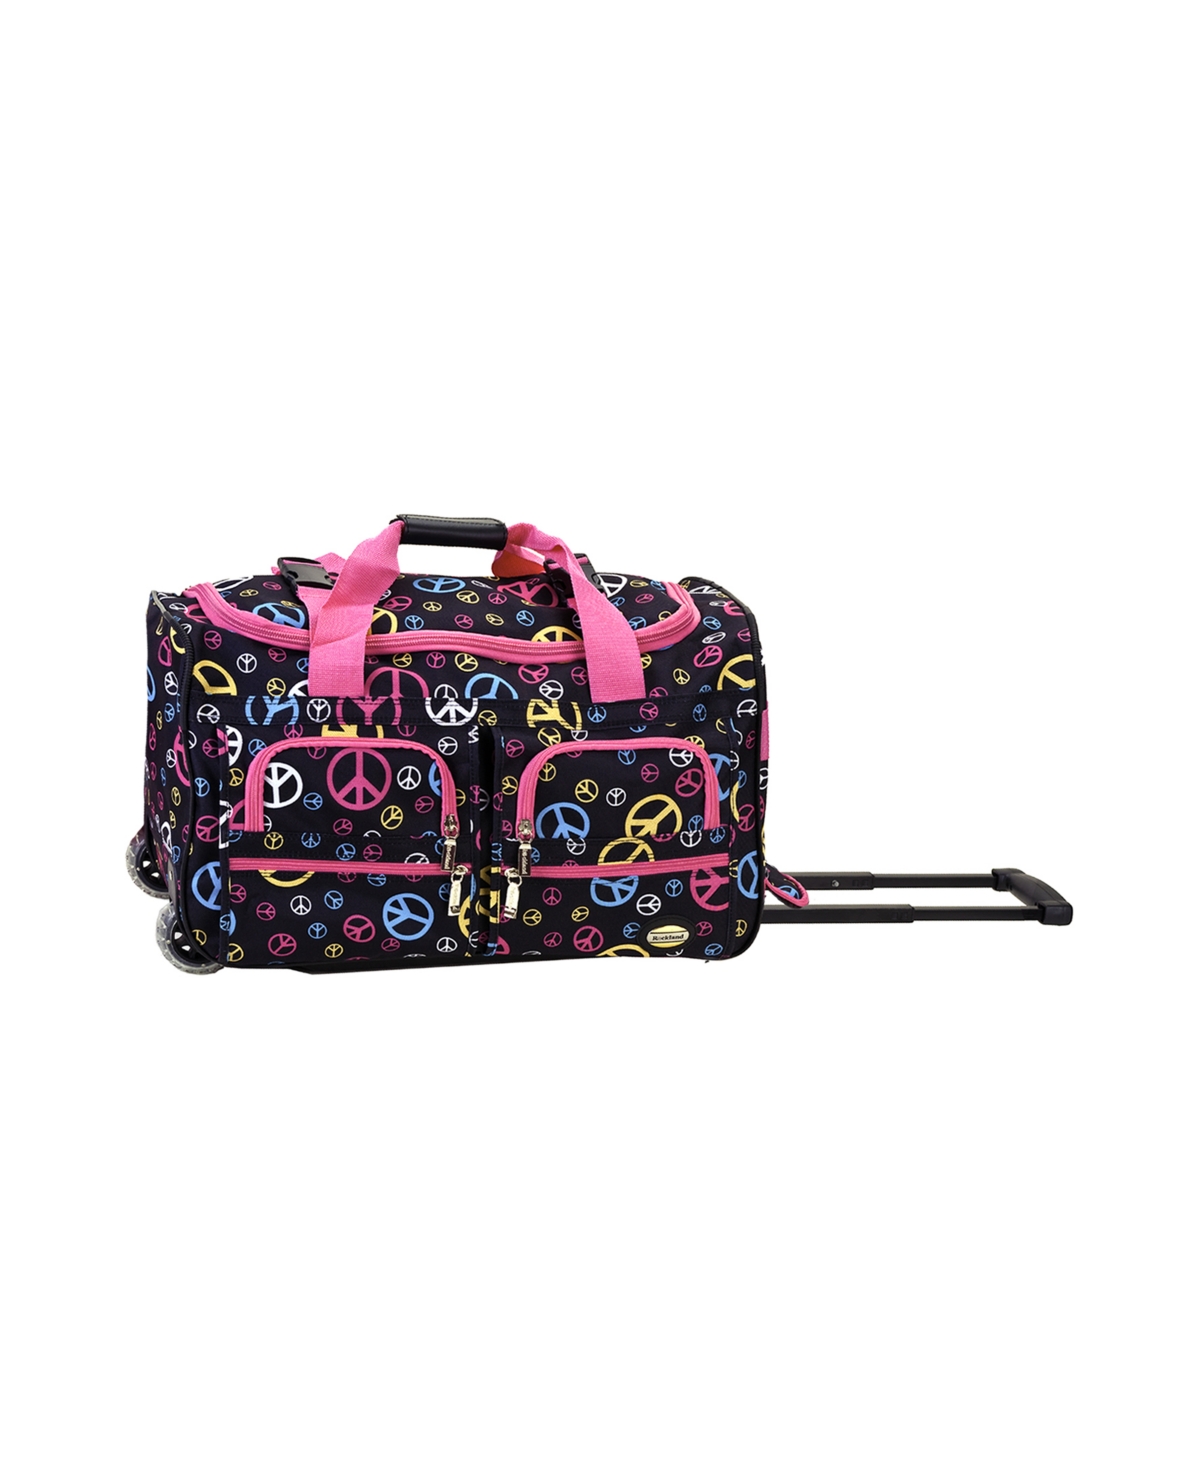 22" Carry-On Rolling Duffle Bag - Owls